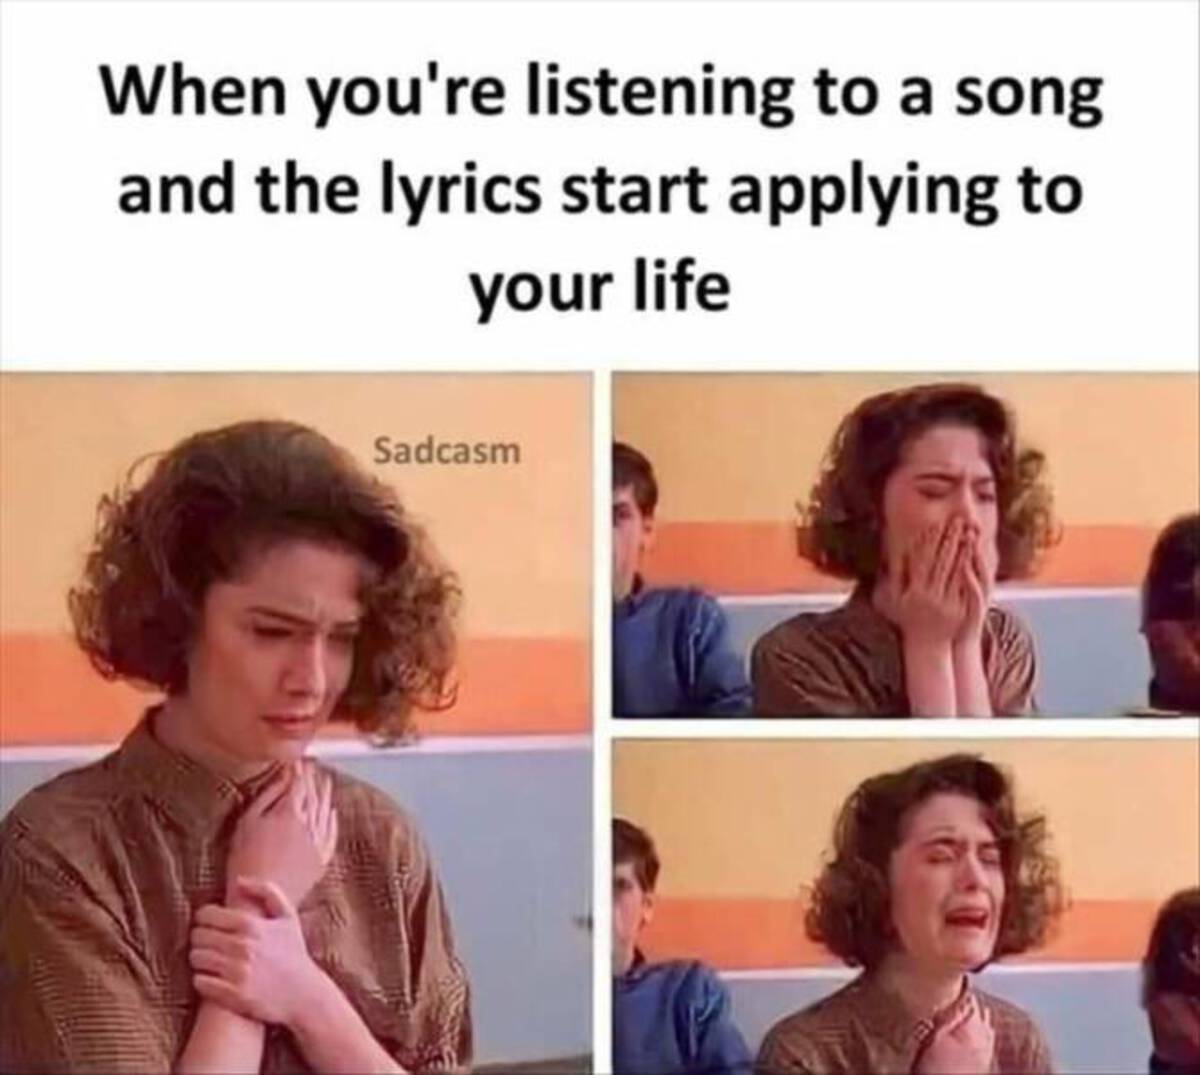 photo caption - When you're listening to a song and the lyrics start applying to your life Sadcasm